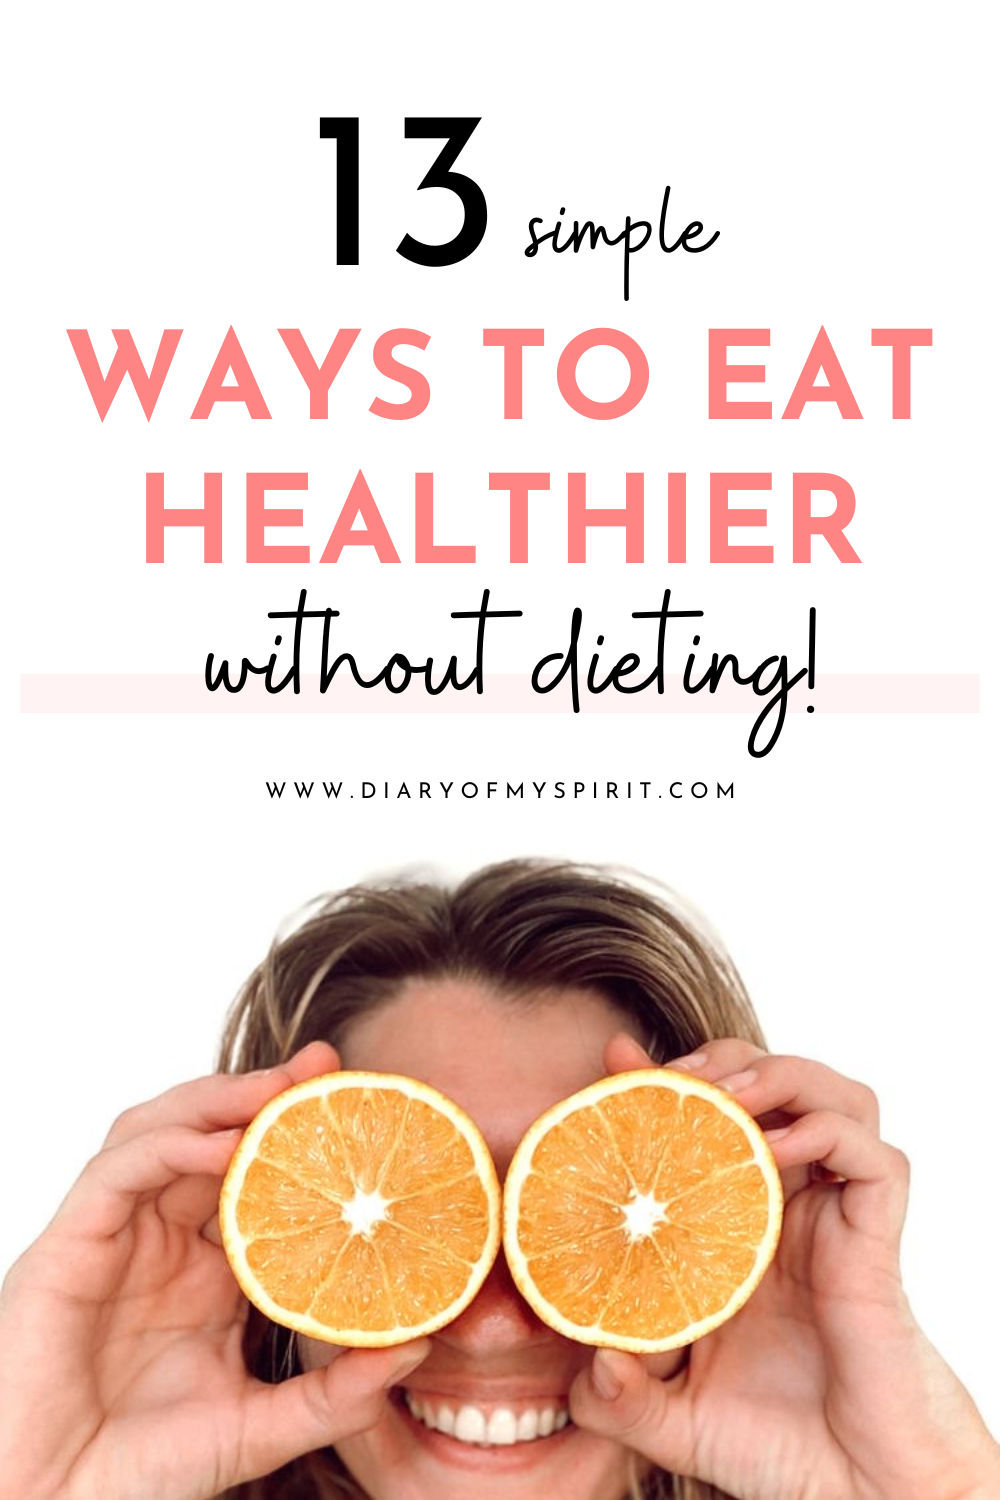 How to eat healthy without dieting. How to be healthier. How to make healthy choices. how to be healthy. how to be healthier. how to eat healthily. healthy tips for eating. healthy choices. healthy habits. woman eating healthy. healthy lifestyle